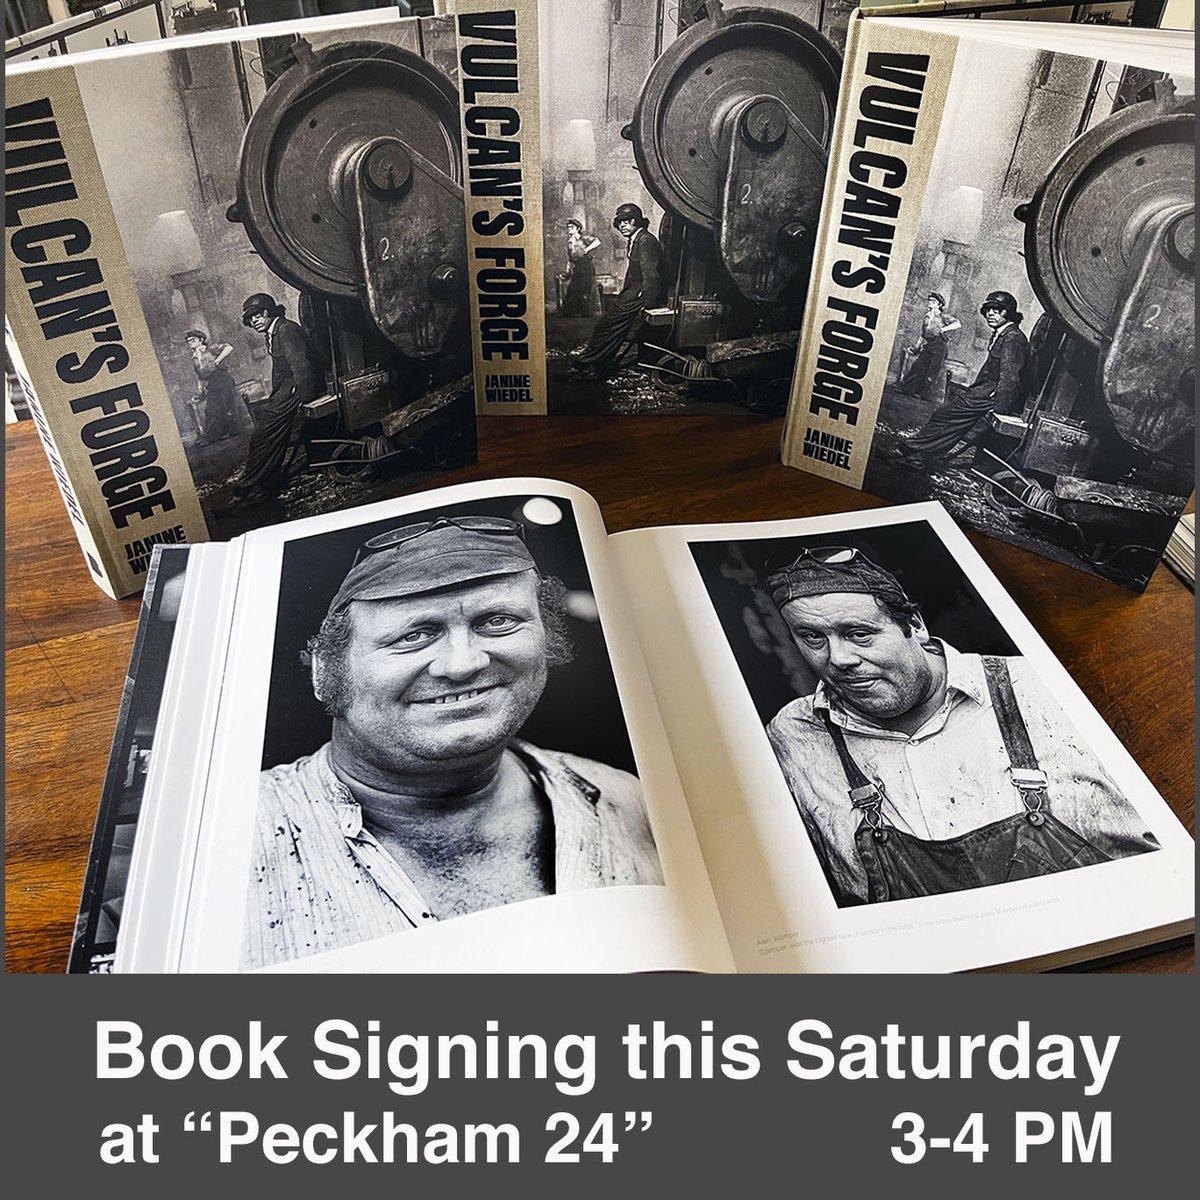 I will be on the Bluecoat Press stand at the ‘Peckham 24’ Book Fair signing ‘Vulcans Forge’ books between 3-4 on Saturday 18th May Would be great to see you there!!! peckham24.com @bluecoatpress @copelandparkse